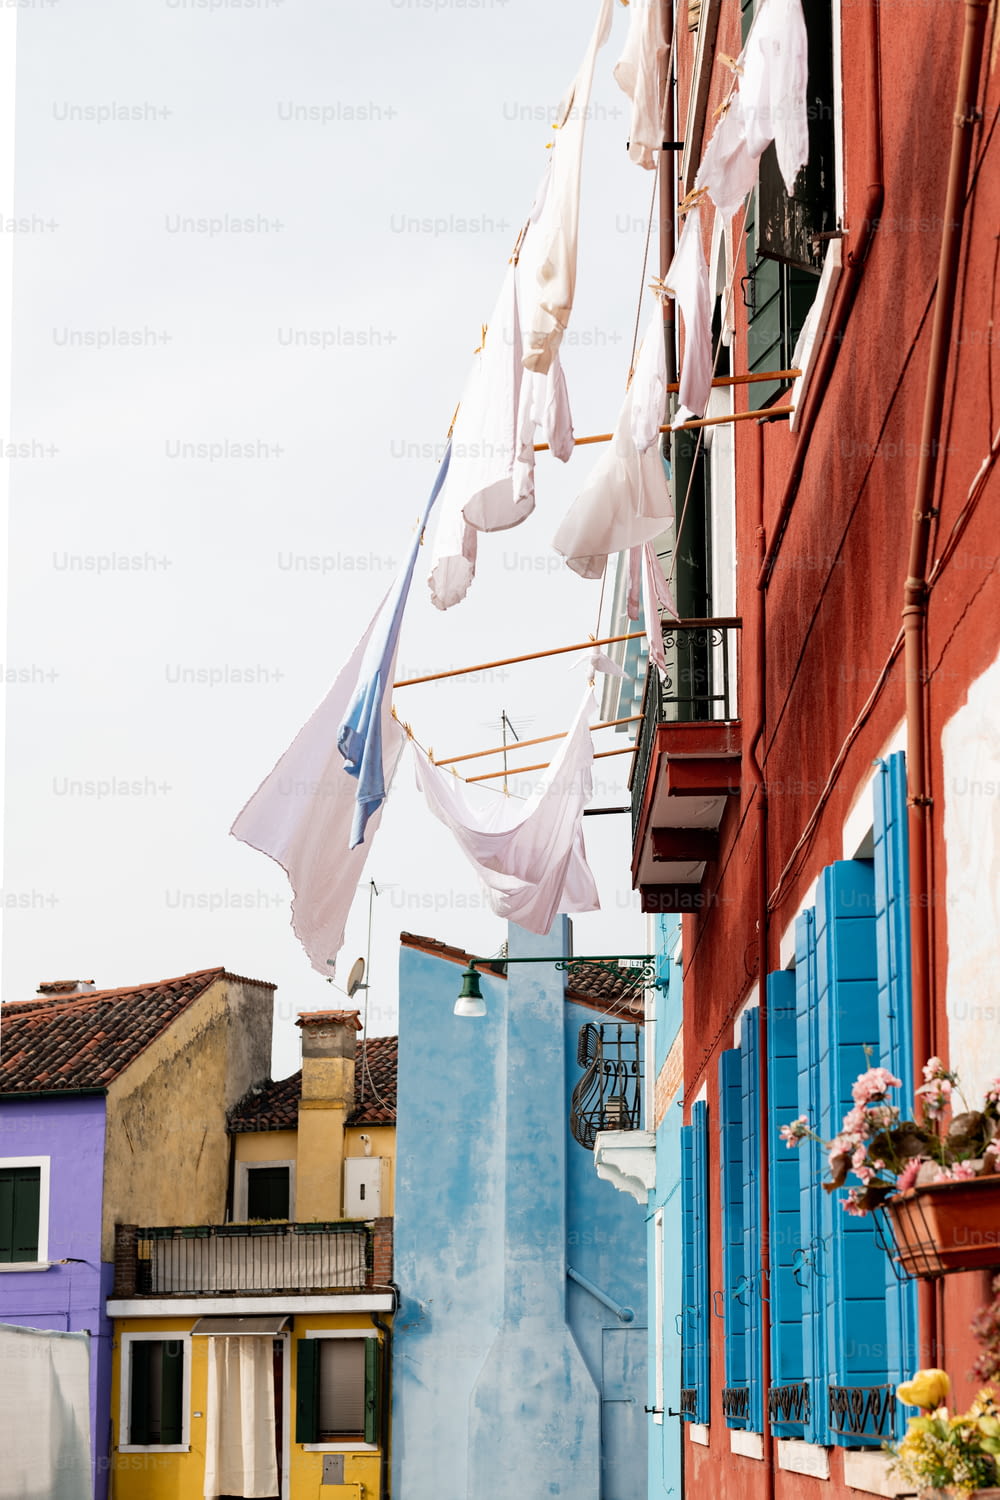 a row of blue and yellow buildings with laundry hanging from them